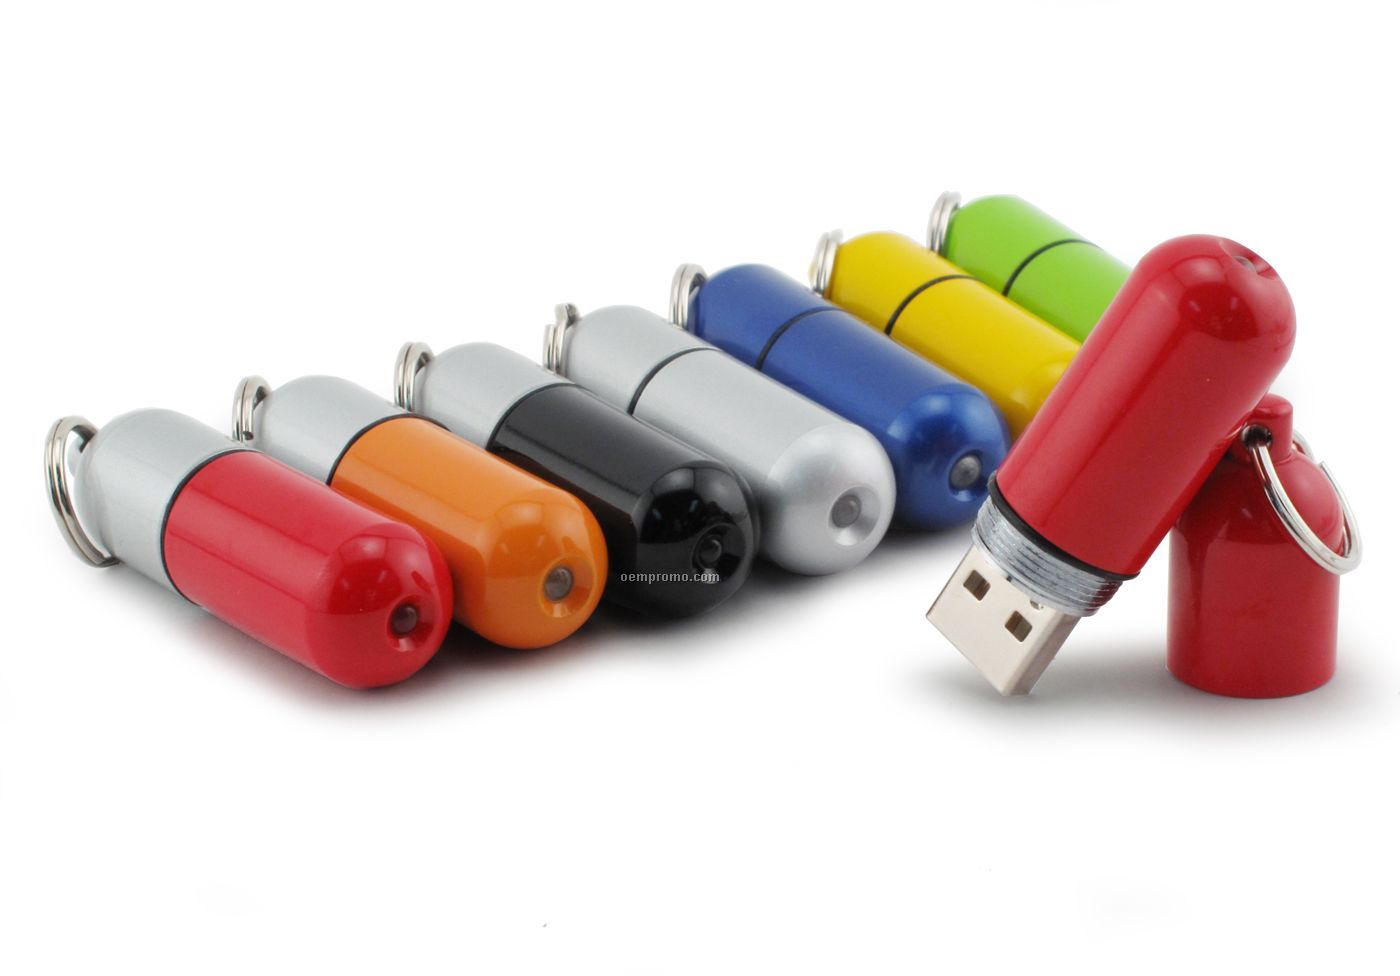 8 Gb Specialty 300 Series USB Drive - Capsule